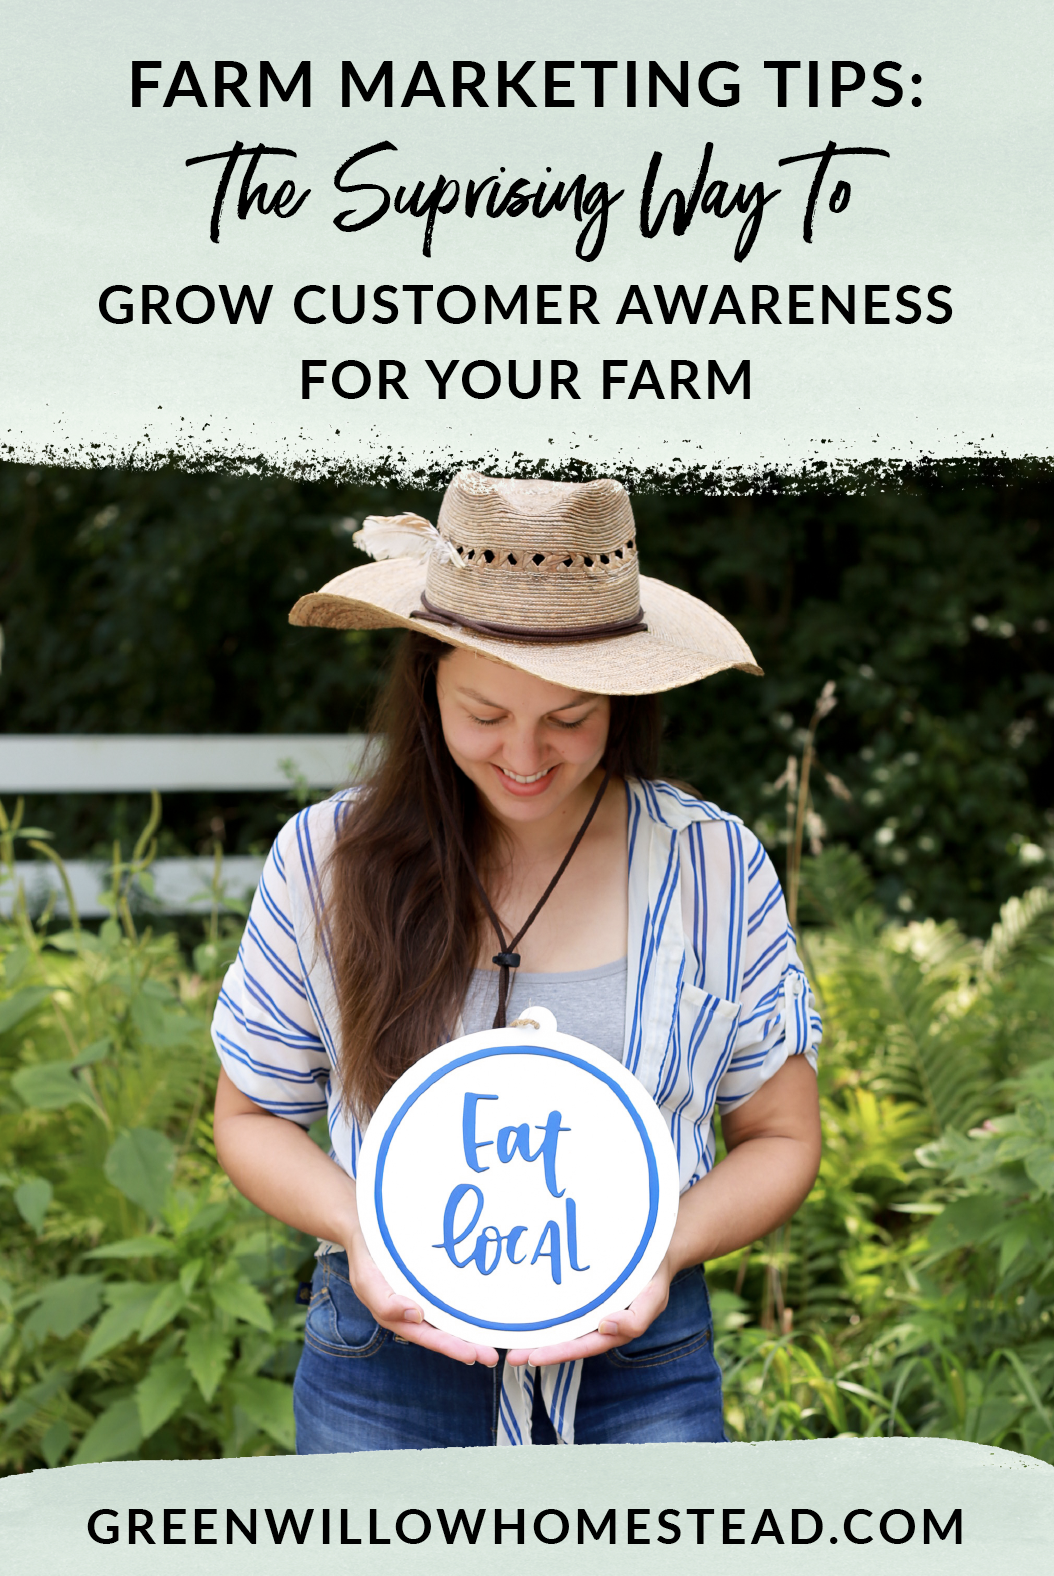 Marketing Tips For Farmers: The Surprising Way to Grow Customer Awareness For Your Farm